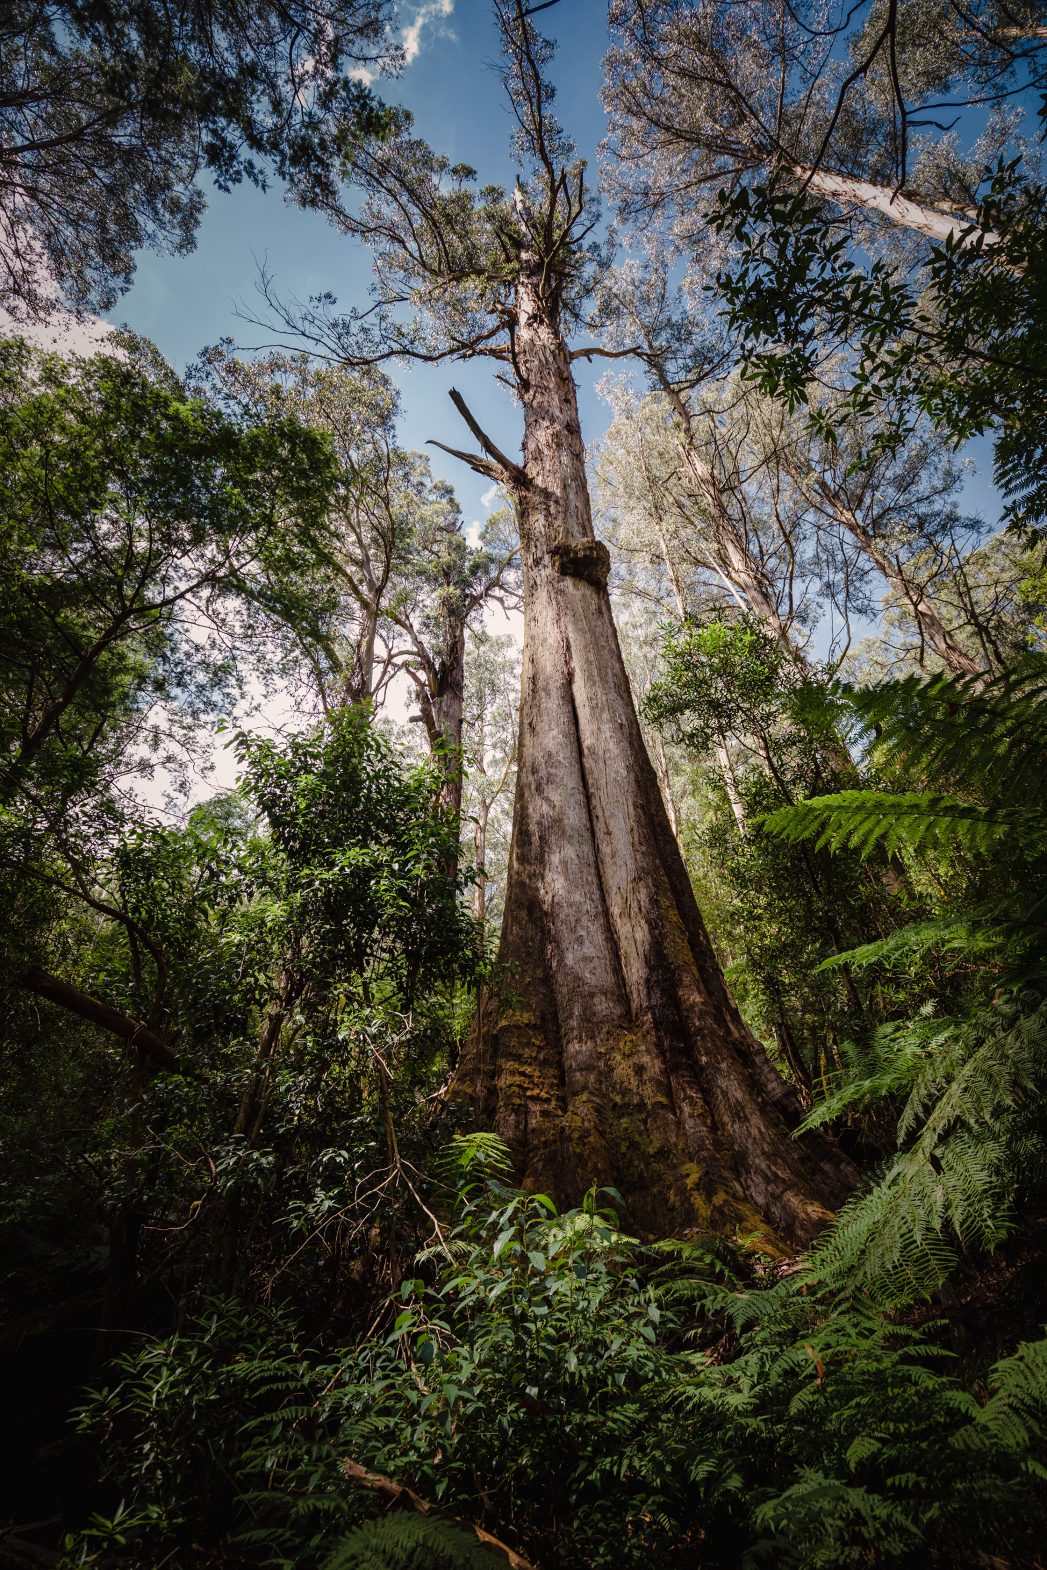 A ground-up camera shot of a huge tree in a lush, green forest habitat.